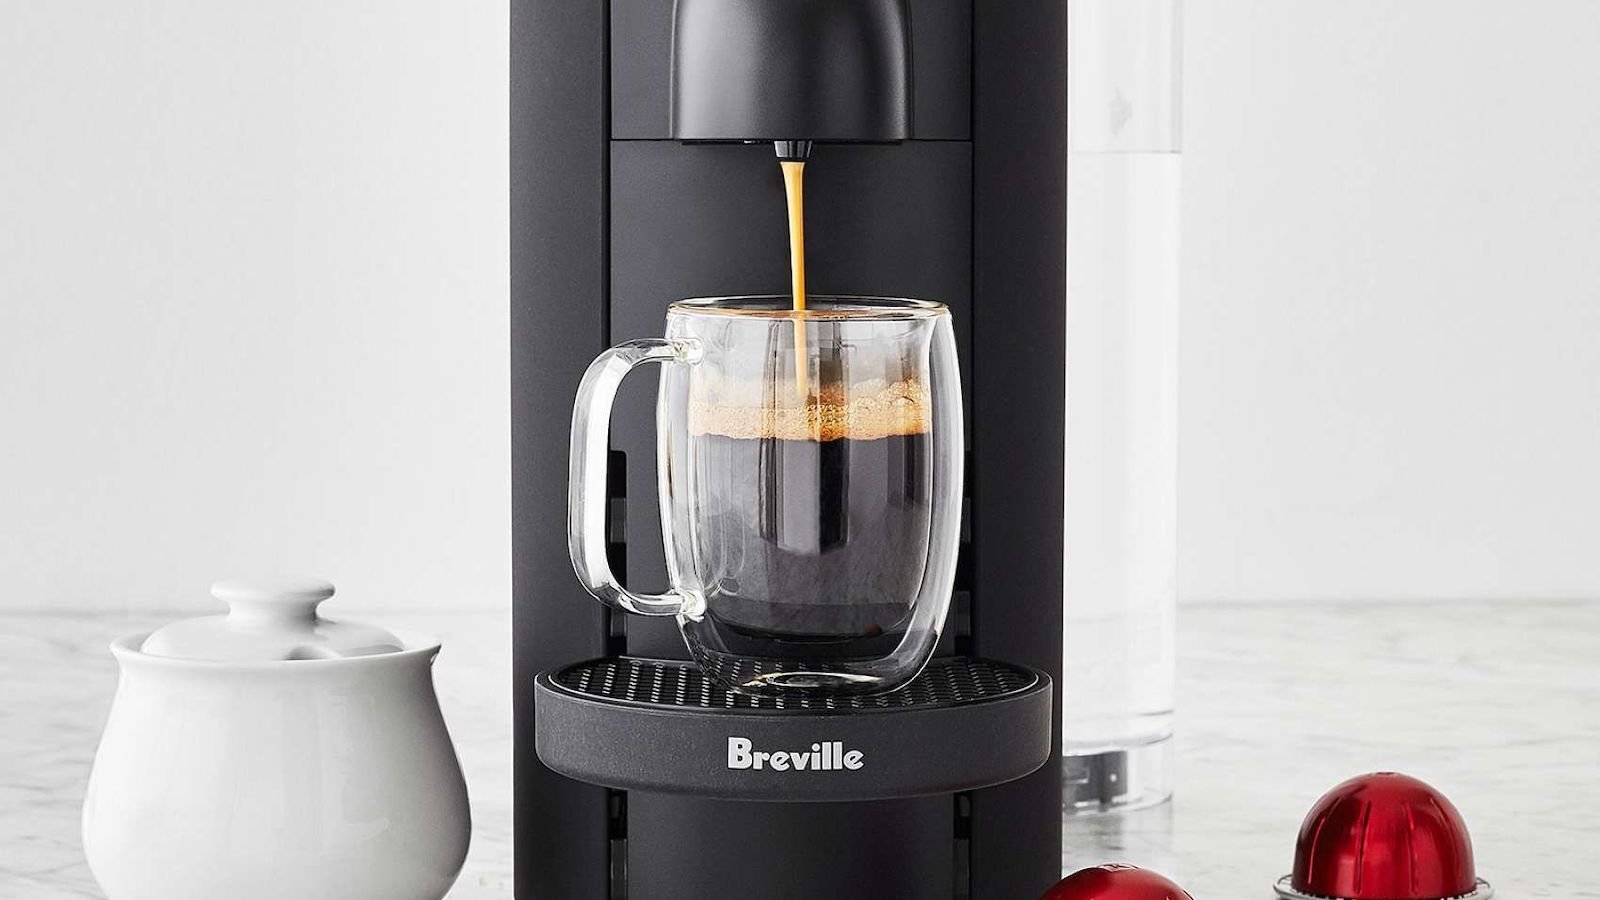 Breville Nespresso VertuoPlus Deluxe capsule coffee maker brews up to 5 cups